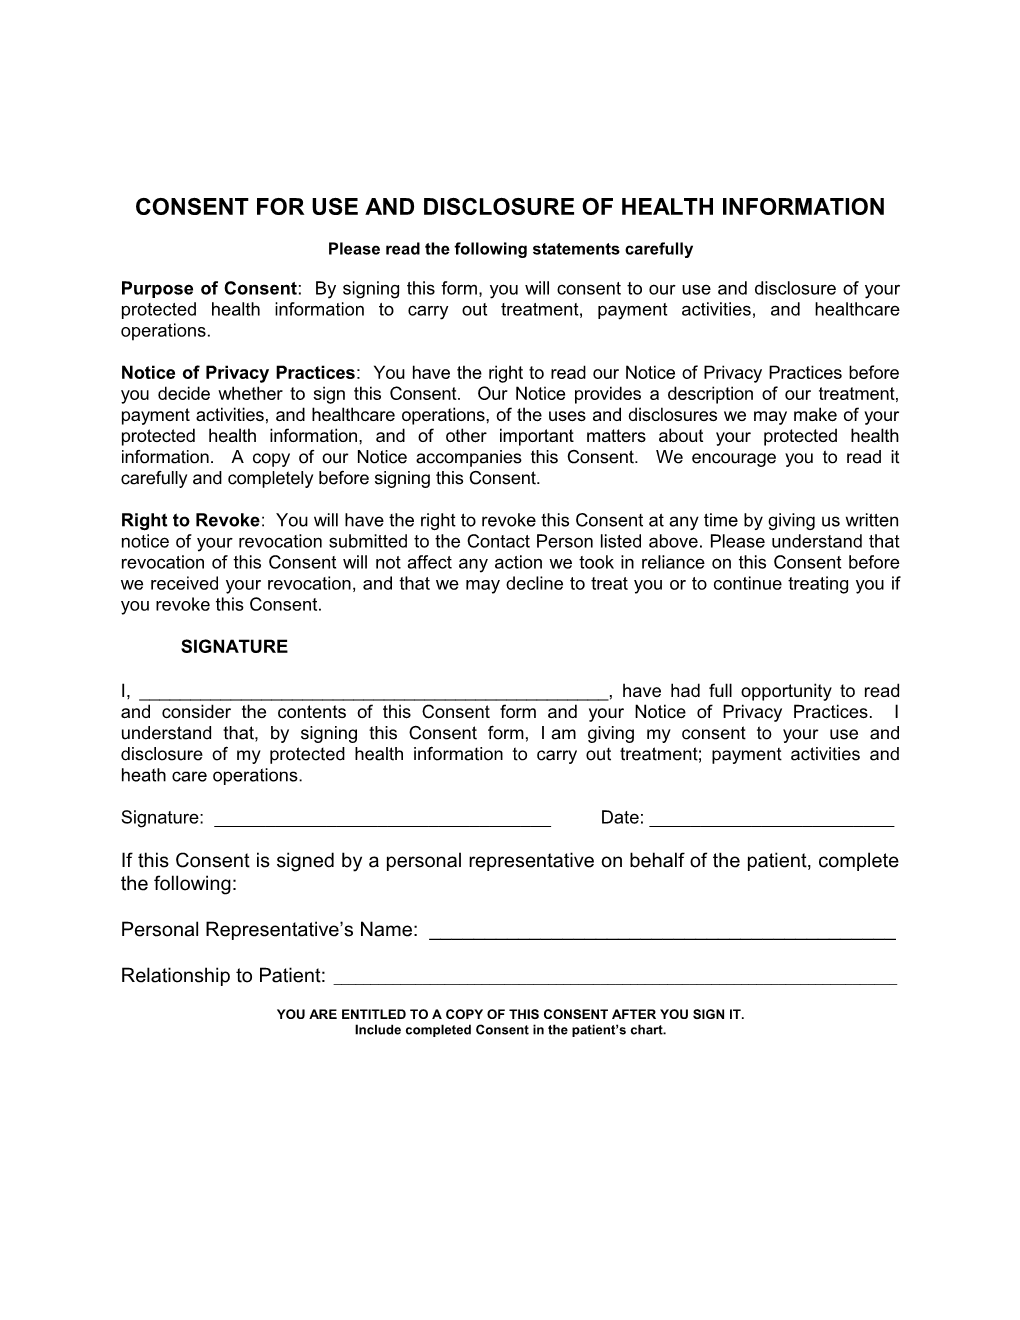 Consent for Use and Disclosure of Health Information